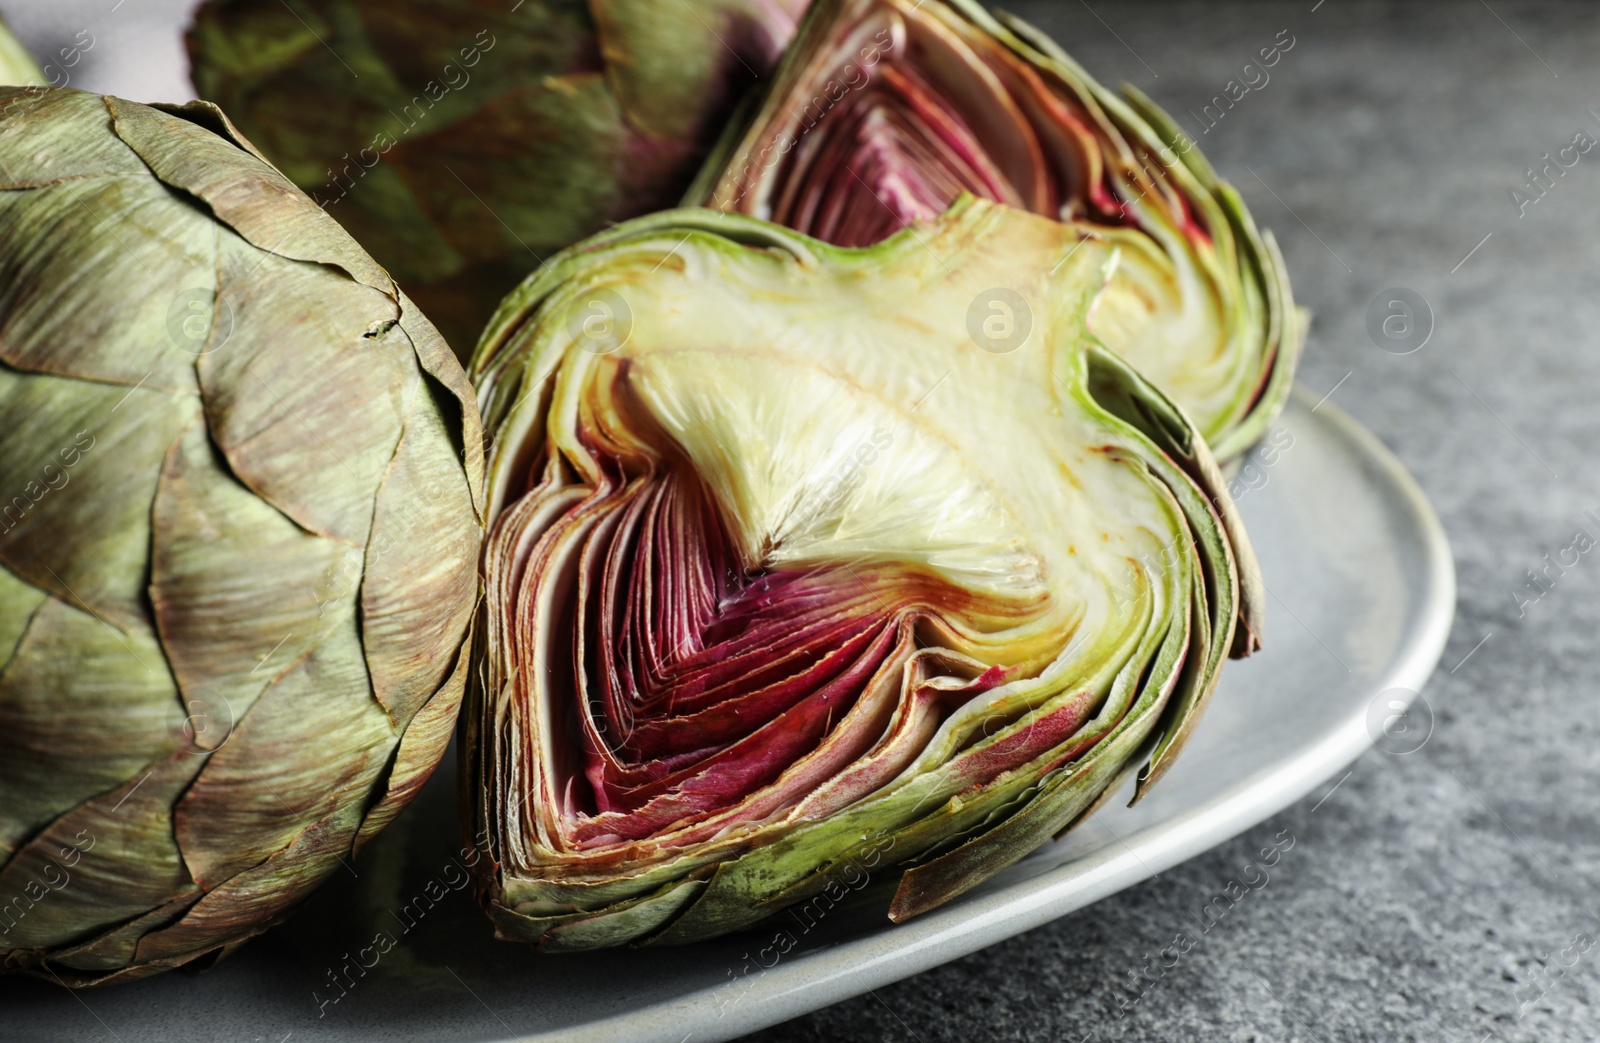 Photo of Cut and whole fresh raw artichokes on grey table, closeup